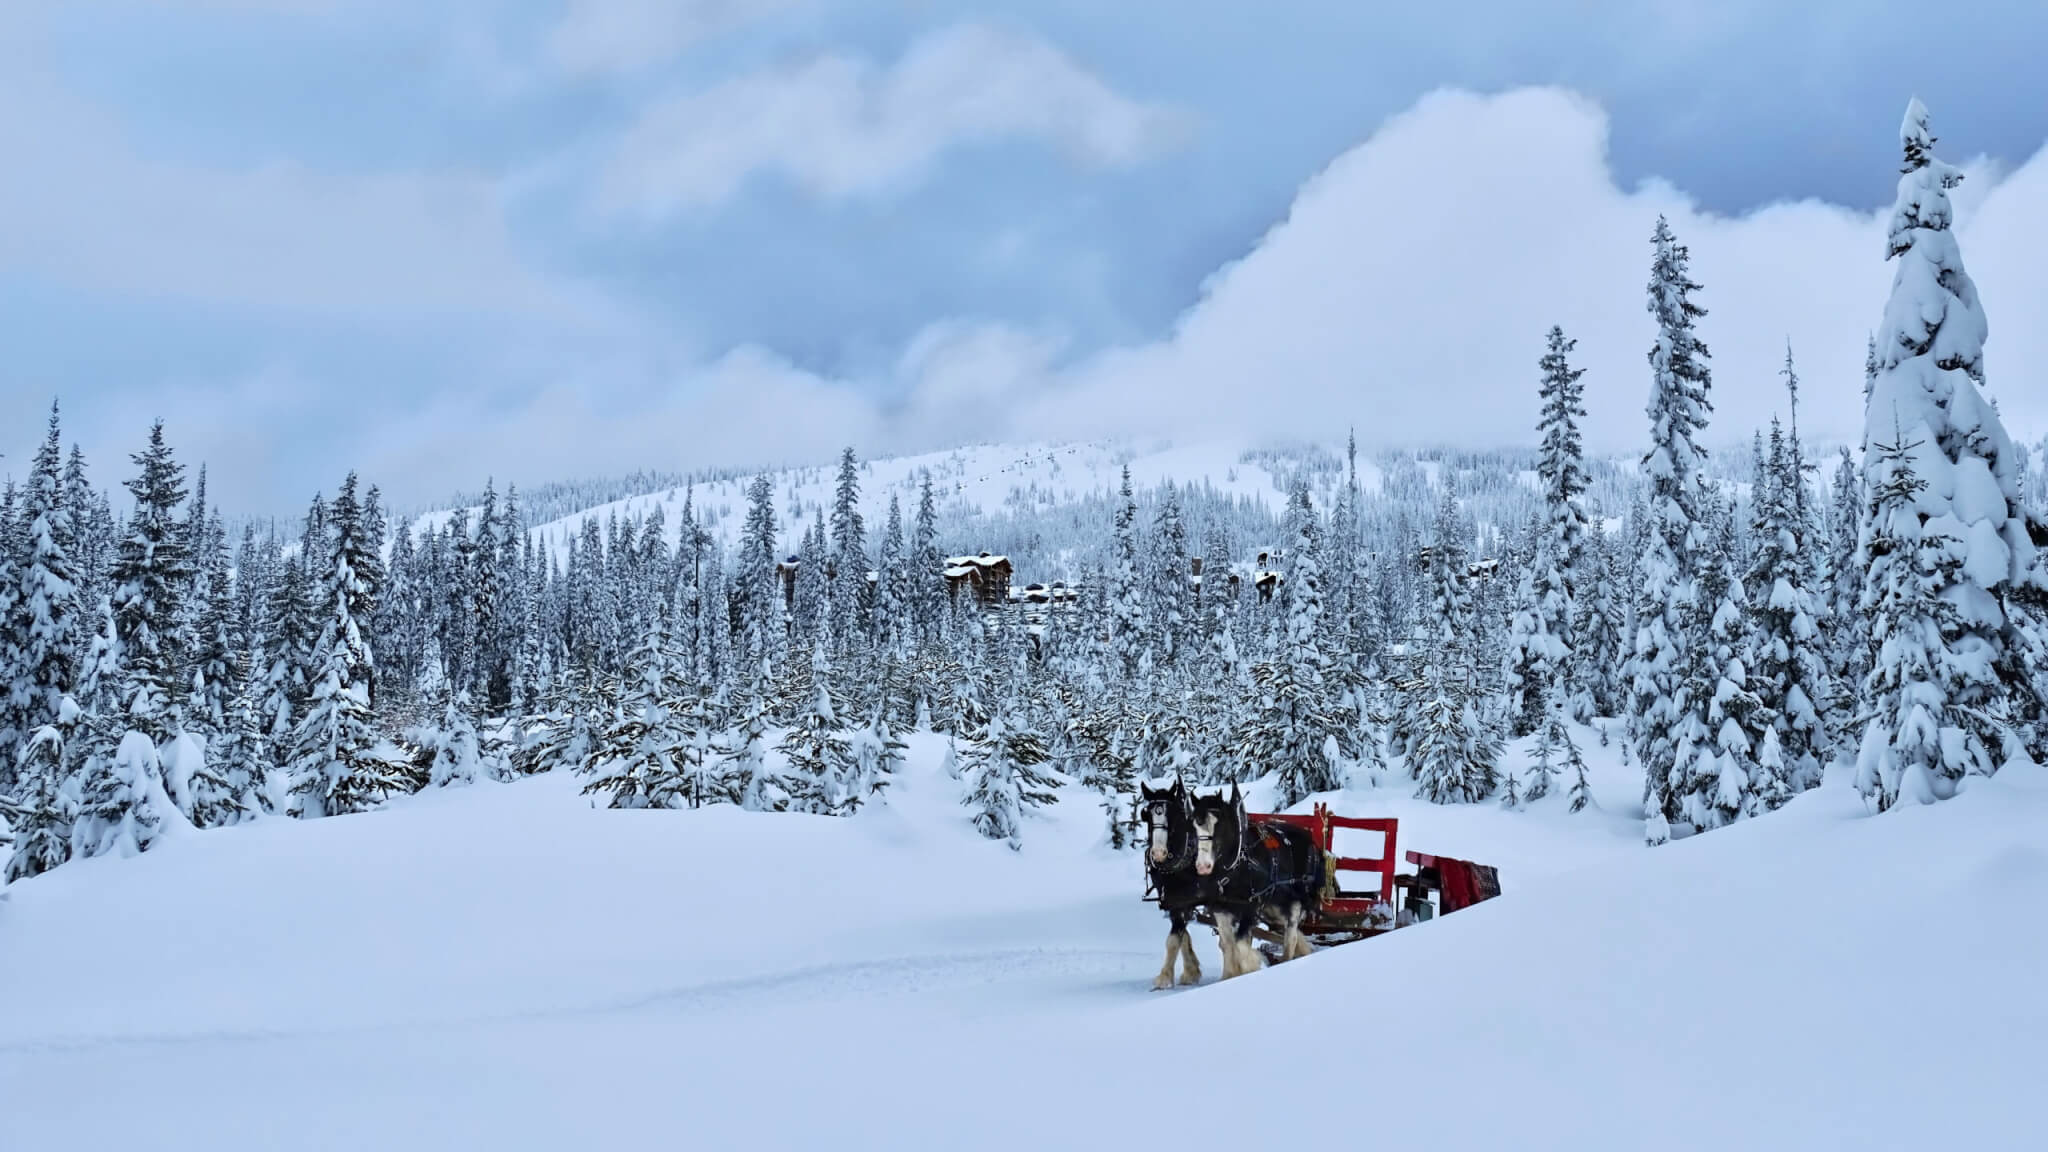 Horses pulling red carriage in winter forest. Tourist attraction in Big White.  Kelowna. Winter forest covered with snow after snowstorm. Big White Ski Resort. Ocanagan. British Columbia. Canada.